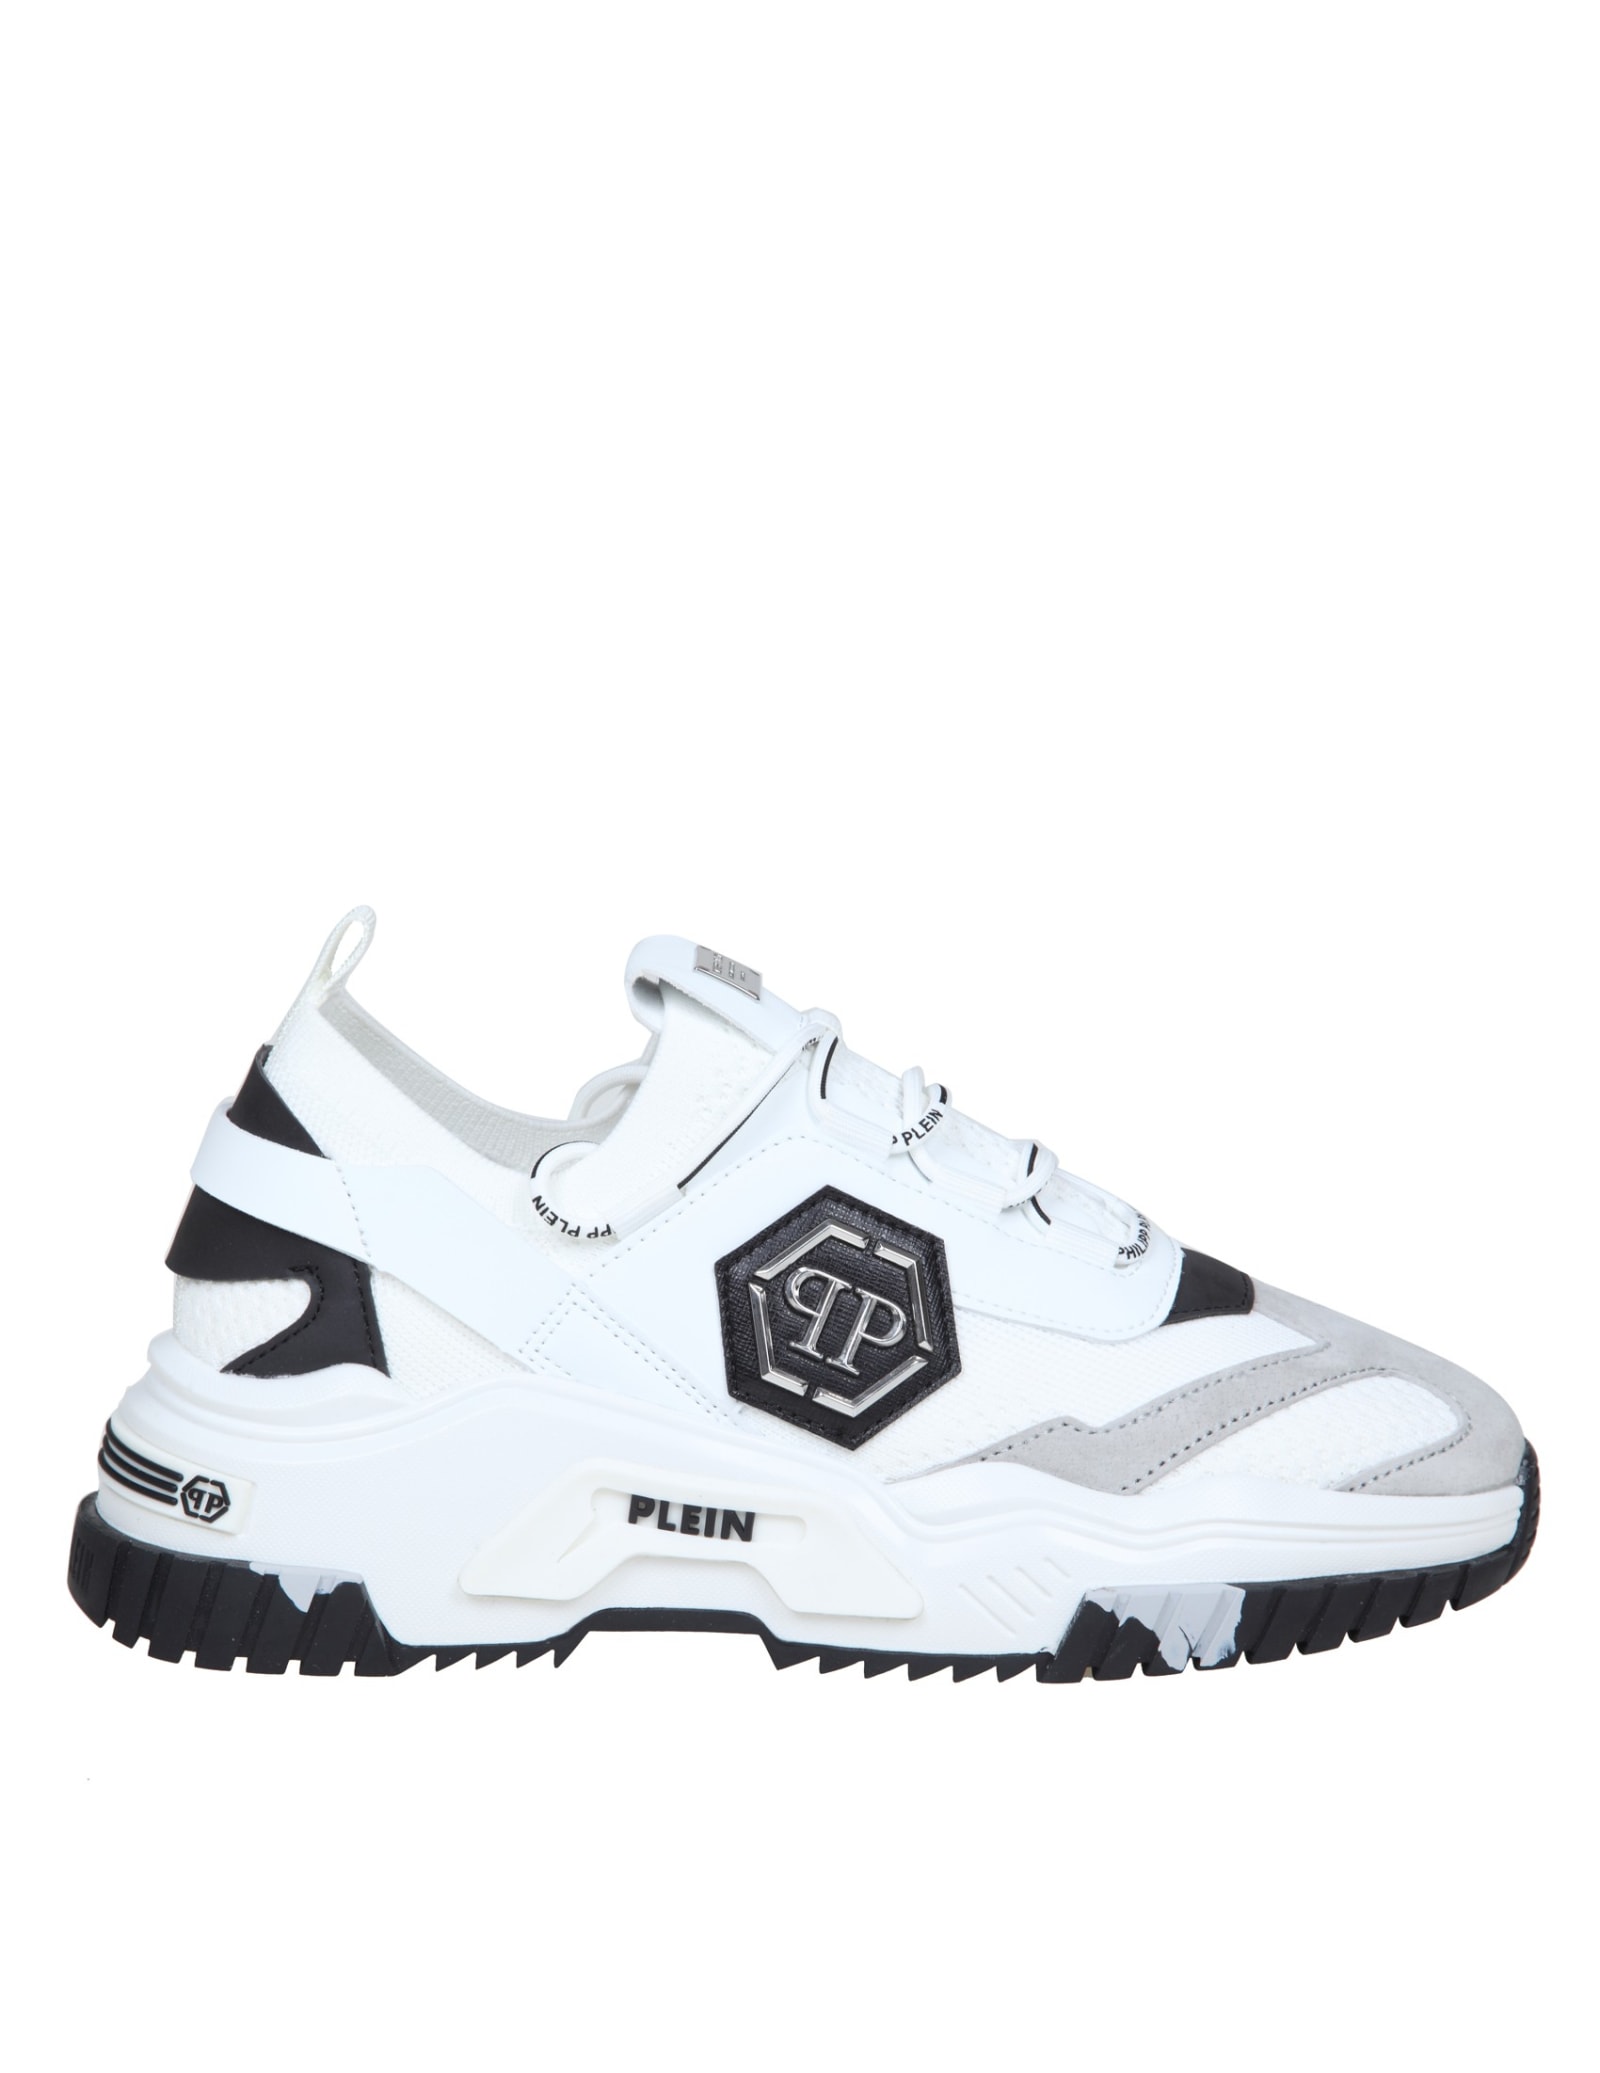 PHILIPP PLEIN SNEAKERS TRAINER PREDATOR IN FABRIC AND LEATHER